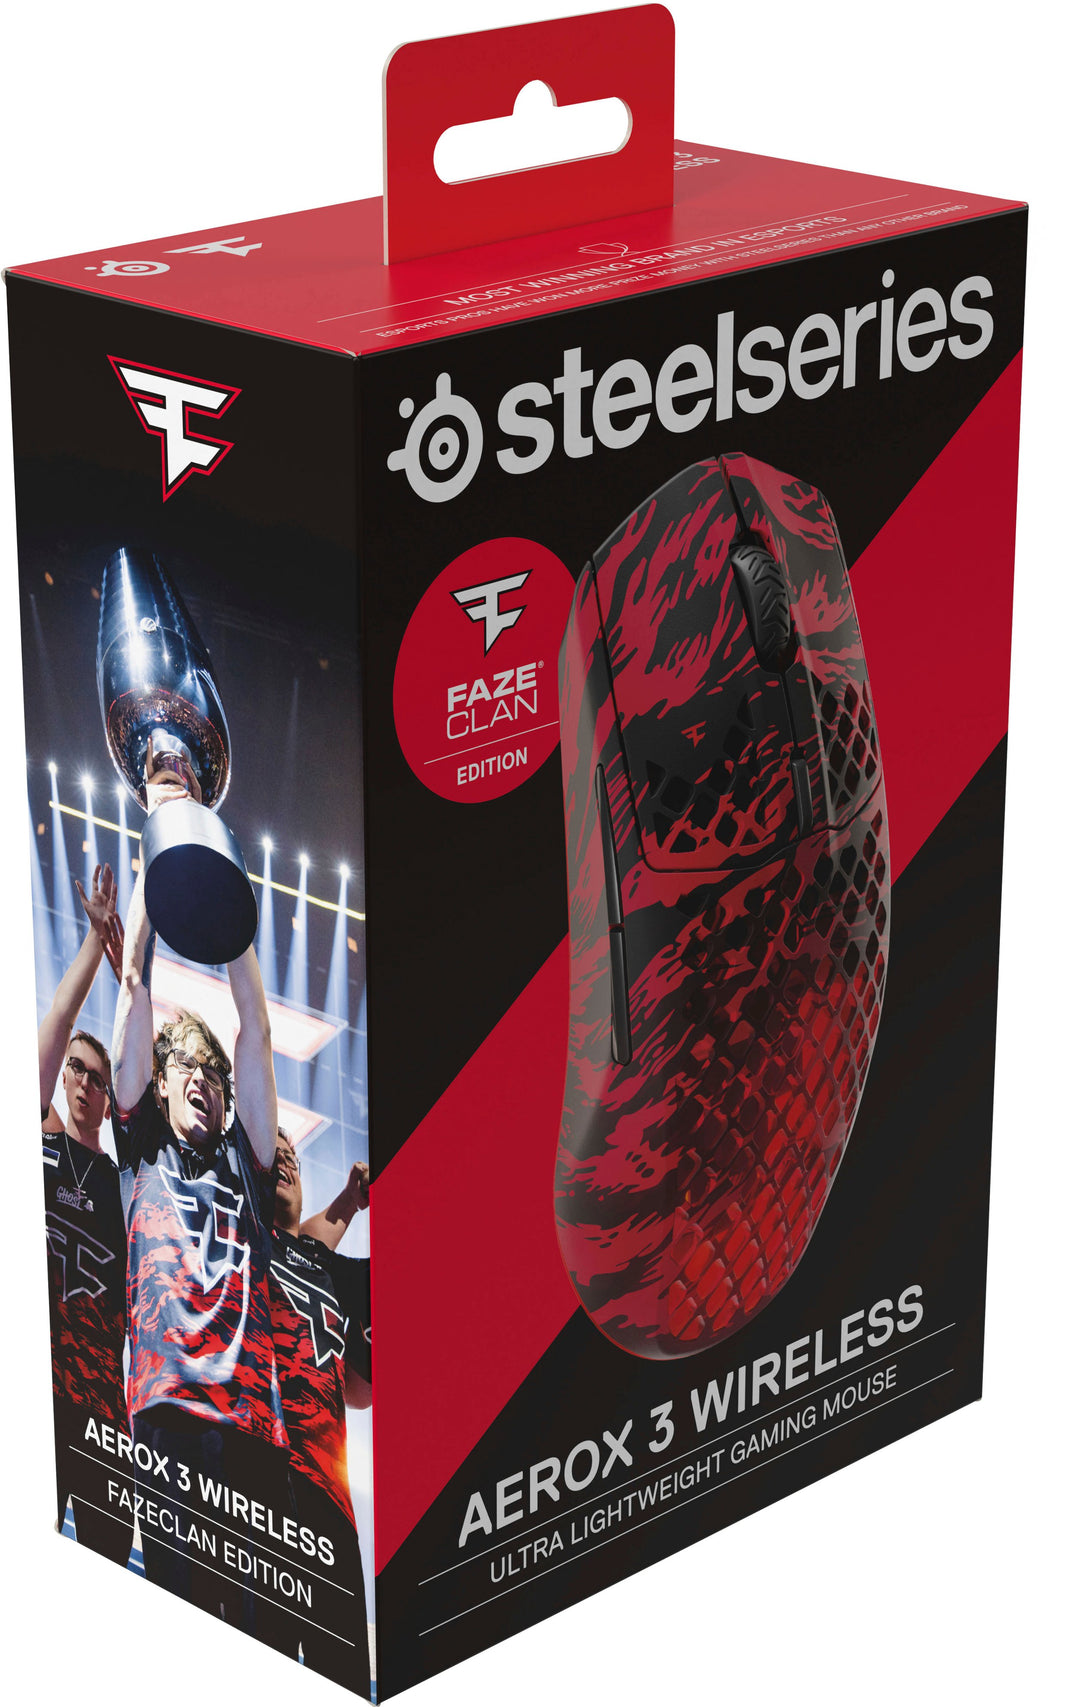 SteelSeries - Aerox 3 Super Light Honeycomb Wireless RGB Optical Gaming Mouse - FaZe Clan Limited Edition_2